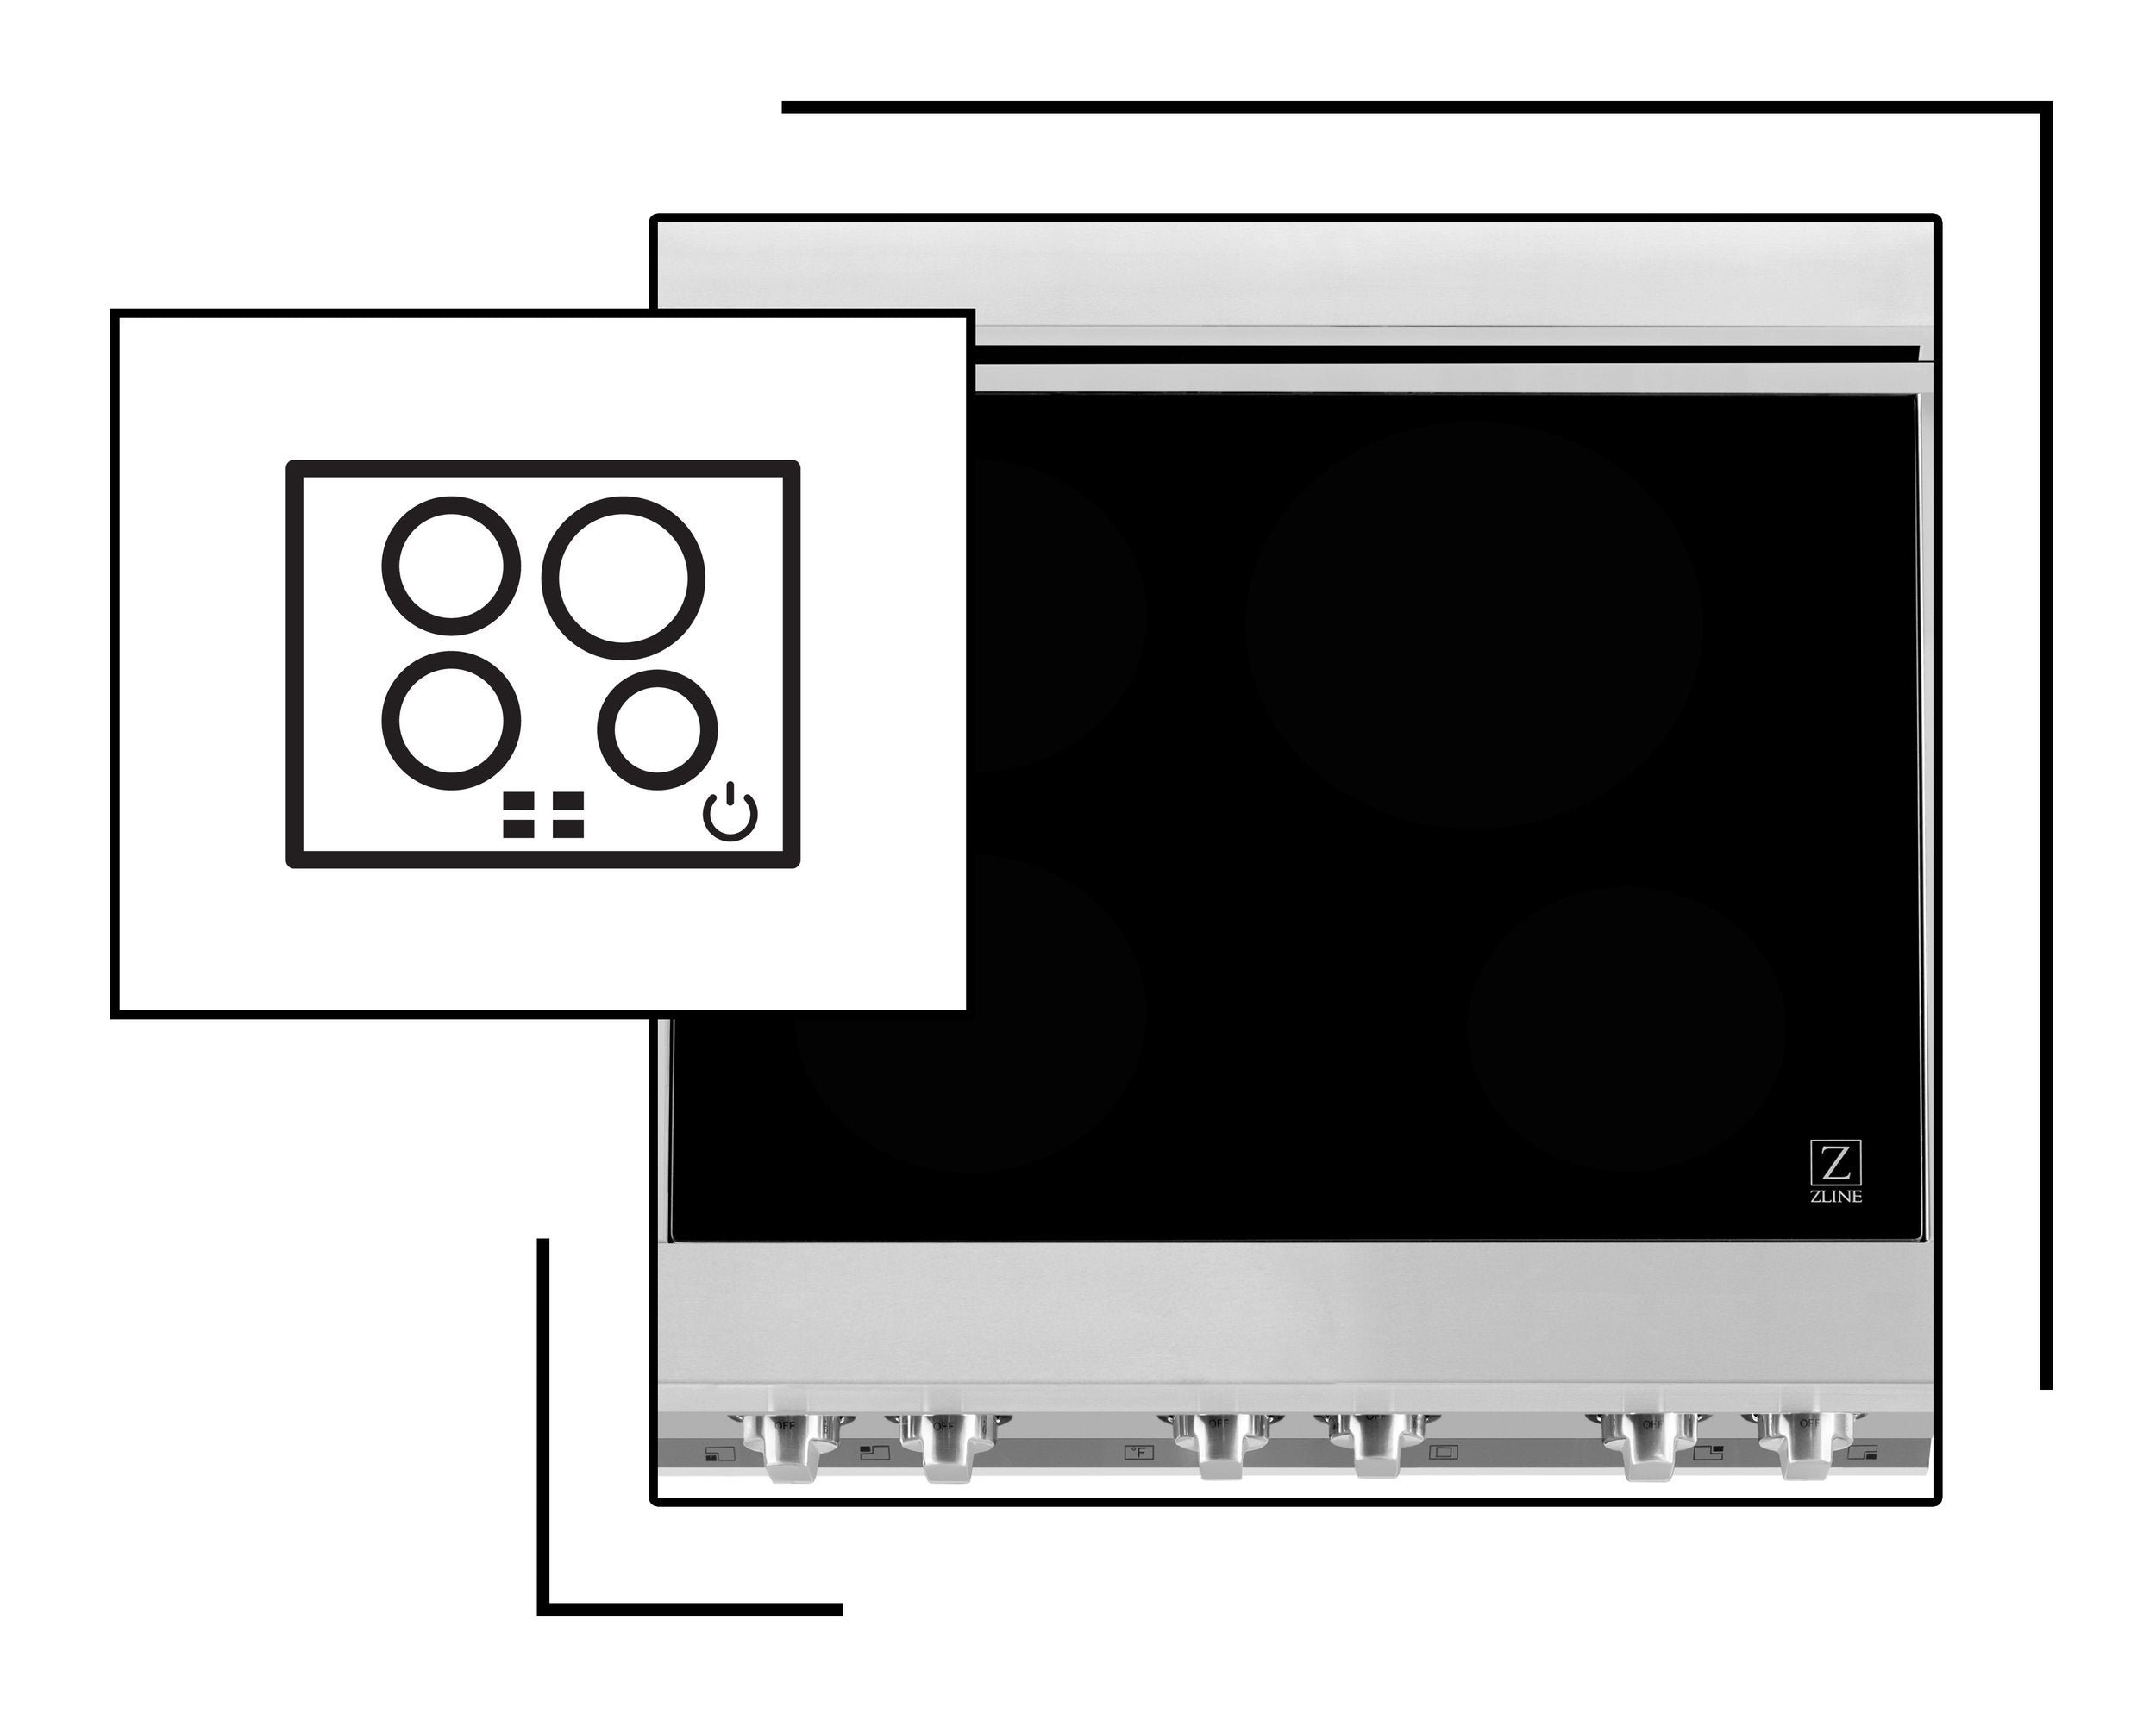 Icon and image representing easy-to-clean cooktop on induction ranges